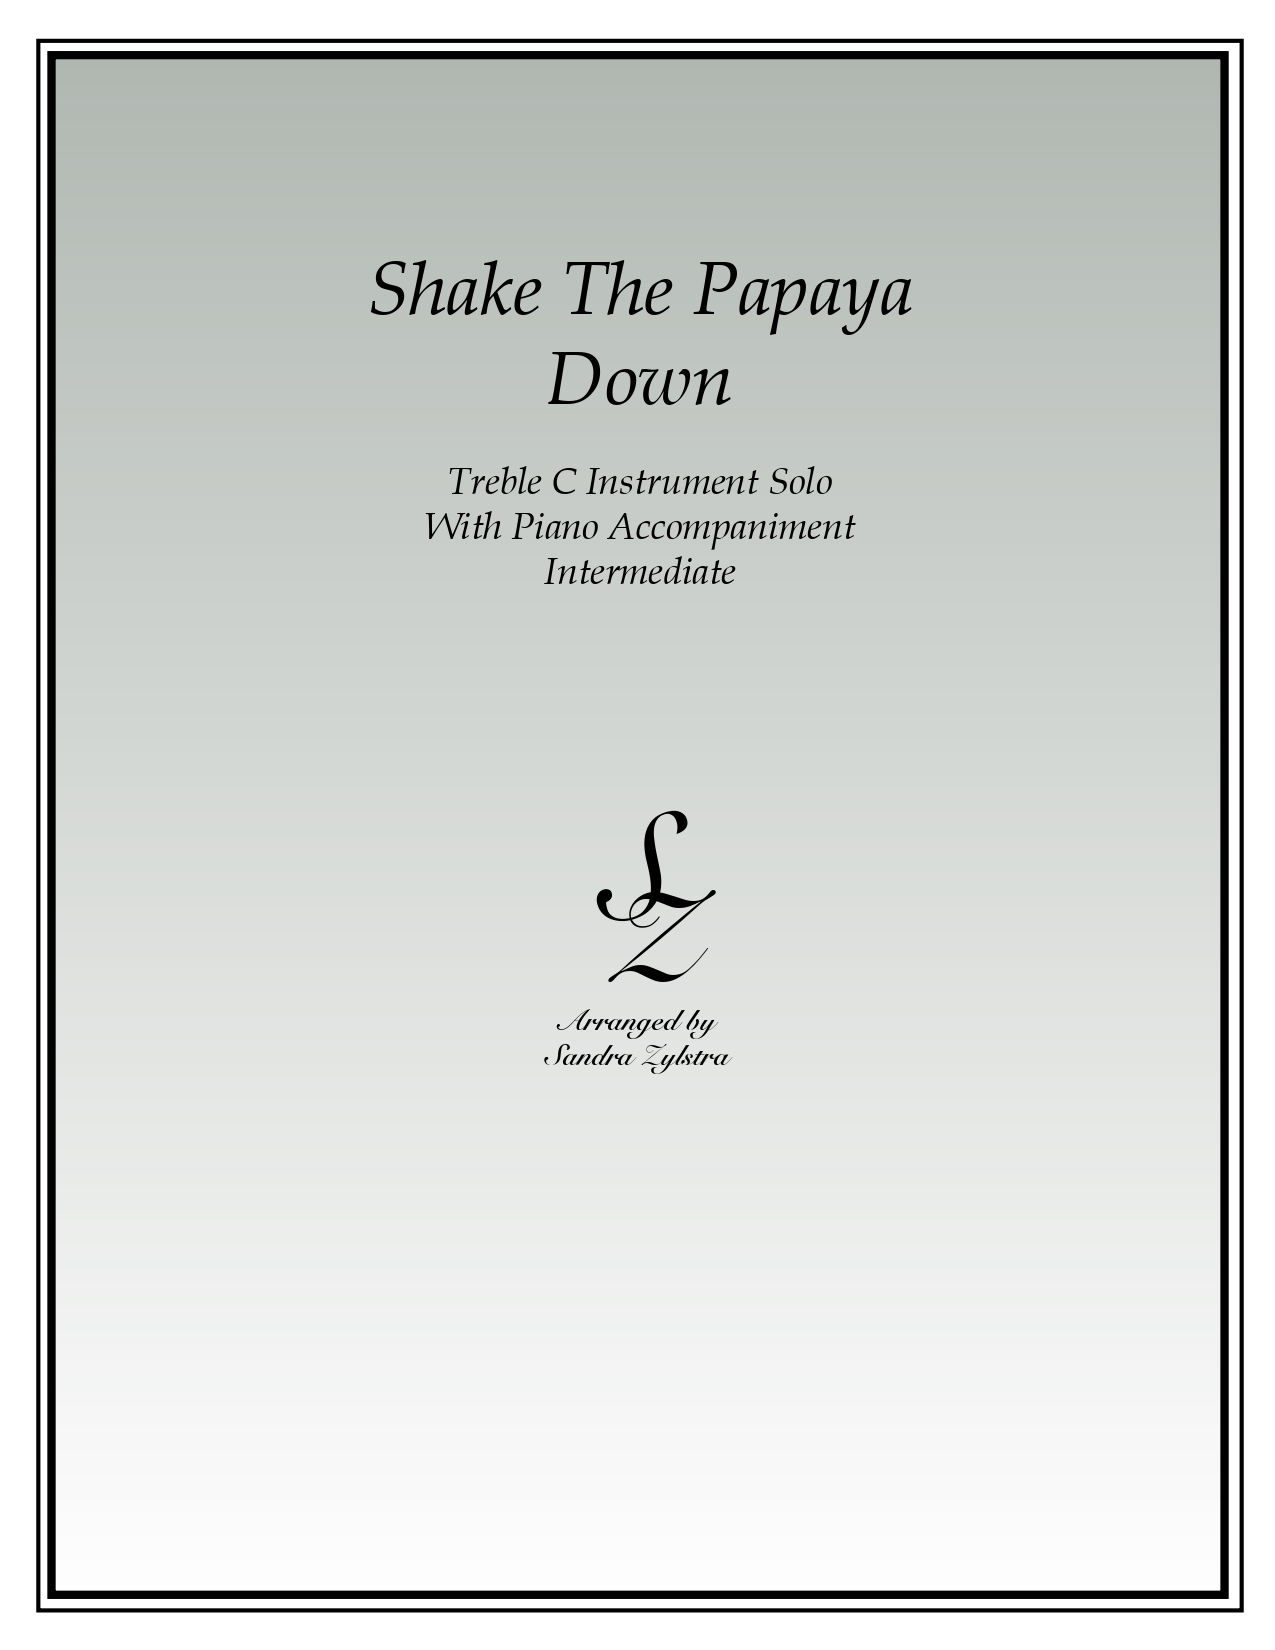 Shake The Papaya Down treble C instrument solo part cover page 00011